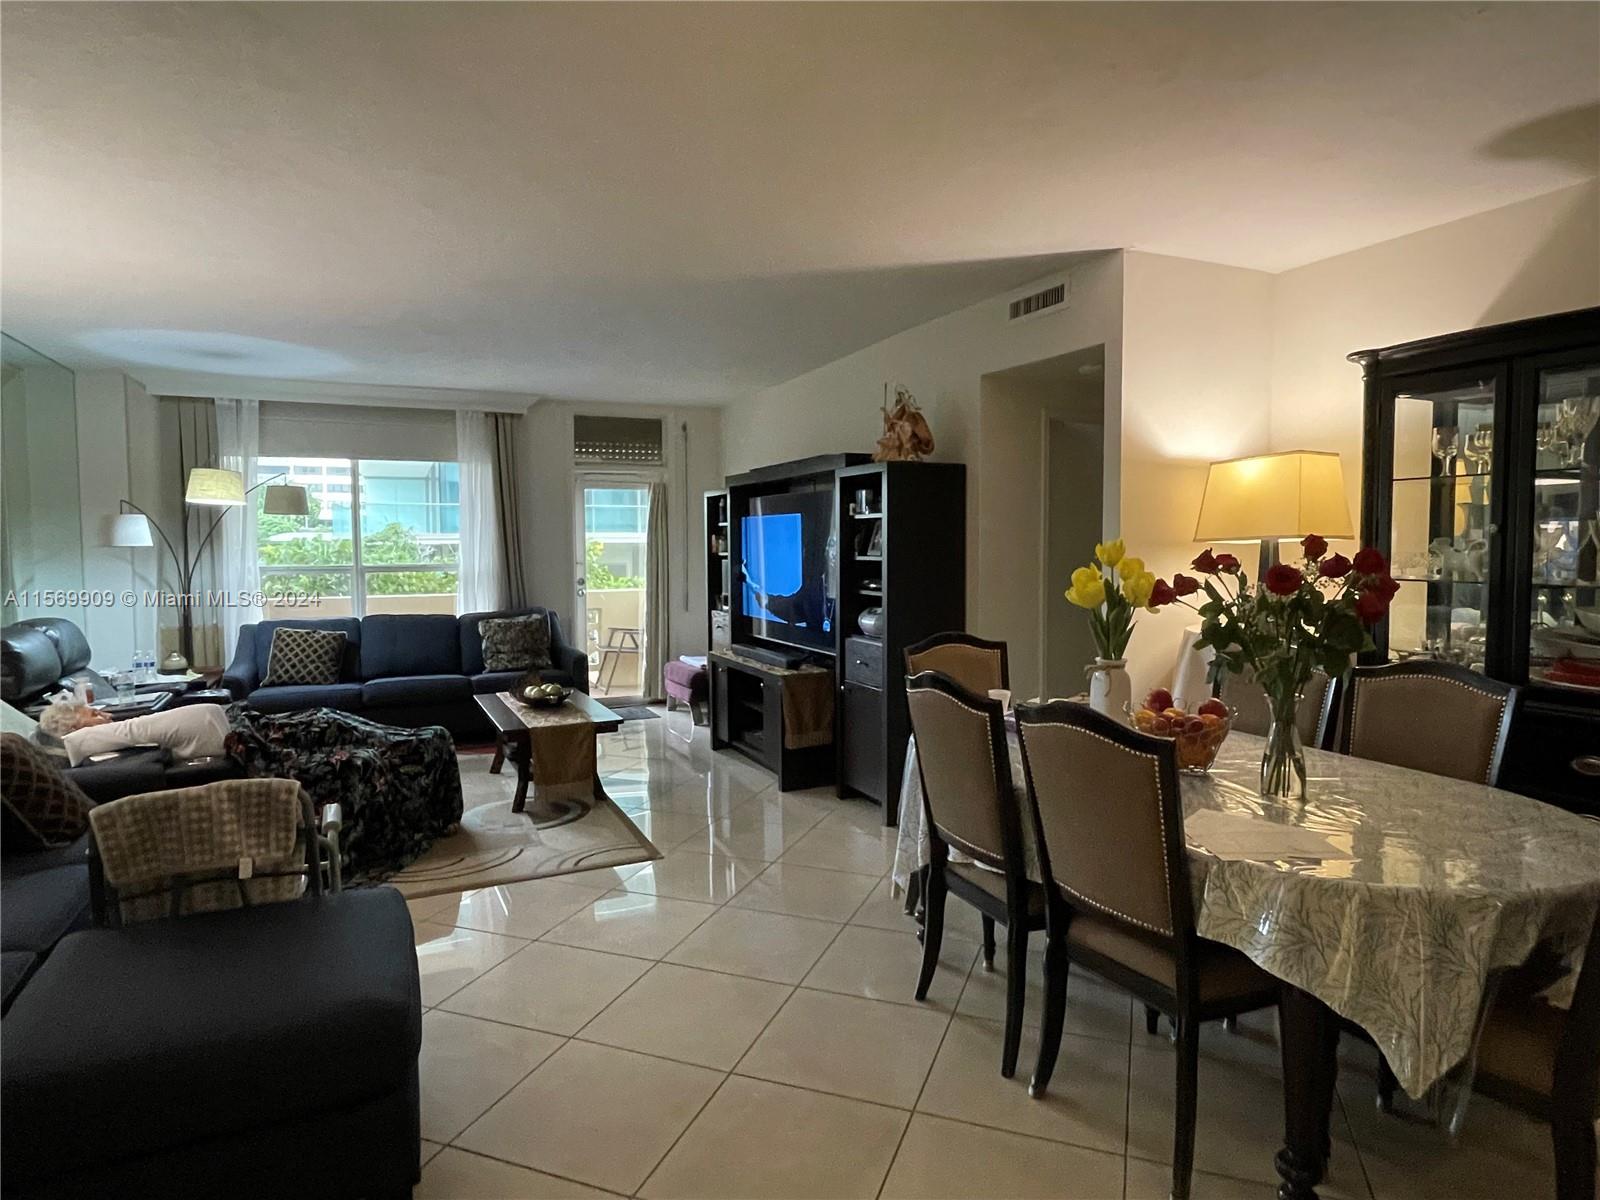 WONDERFUL LOCATION! 1 Bed/ 1.5 Bath apartment. Direct access to pool and beach, no need to take elevator. BUILDING AMENITIES INCLUDE 24-HOUR SECURITY, VALET PARKING, FITNESS CENTER, POOL JACUZZI, AND THE BEACH!! WALKING DISTANCE TO BAL HARBOUR SHOPS, DINING & SHOPPING. EXCELLENT SCHOOL DISTRICT! Easy to show! Unit is being sold totally furnished!